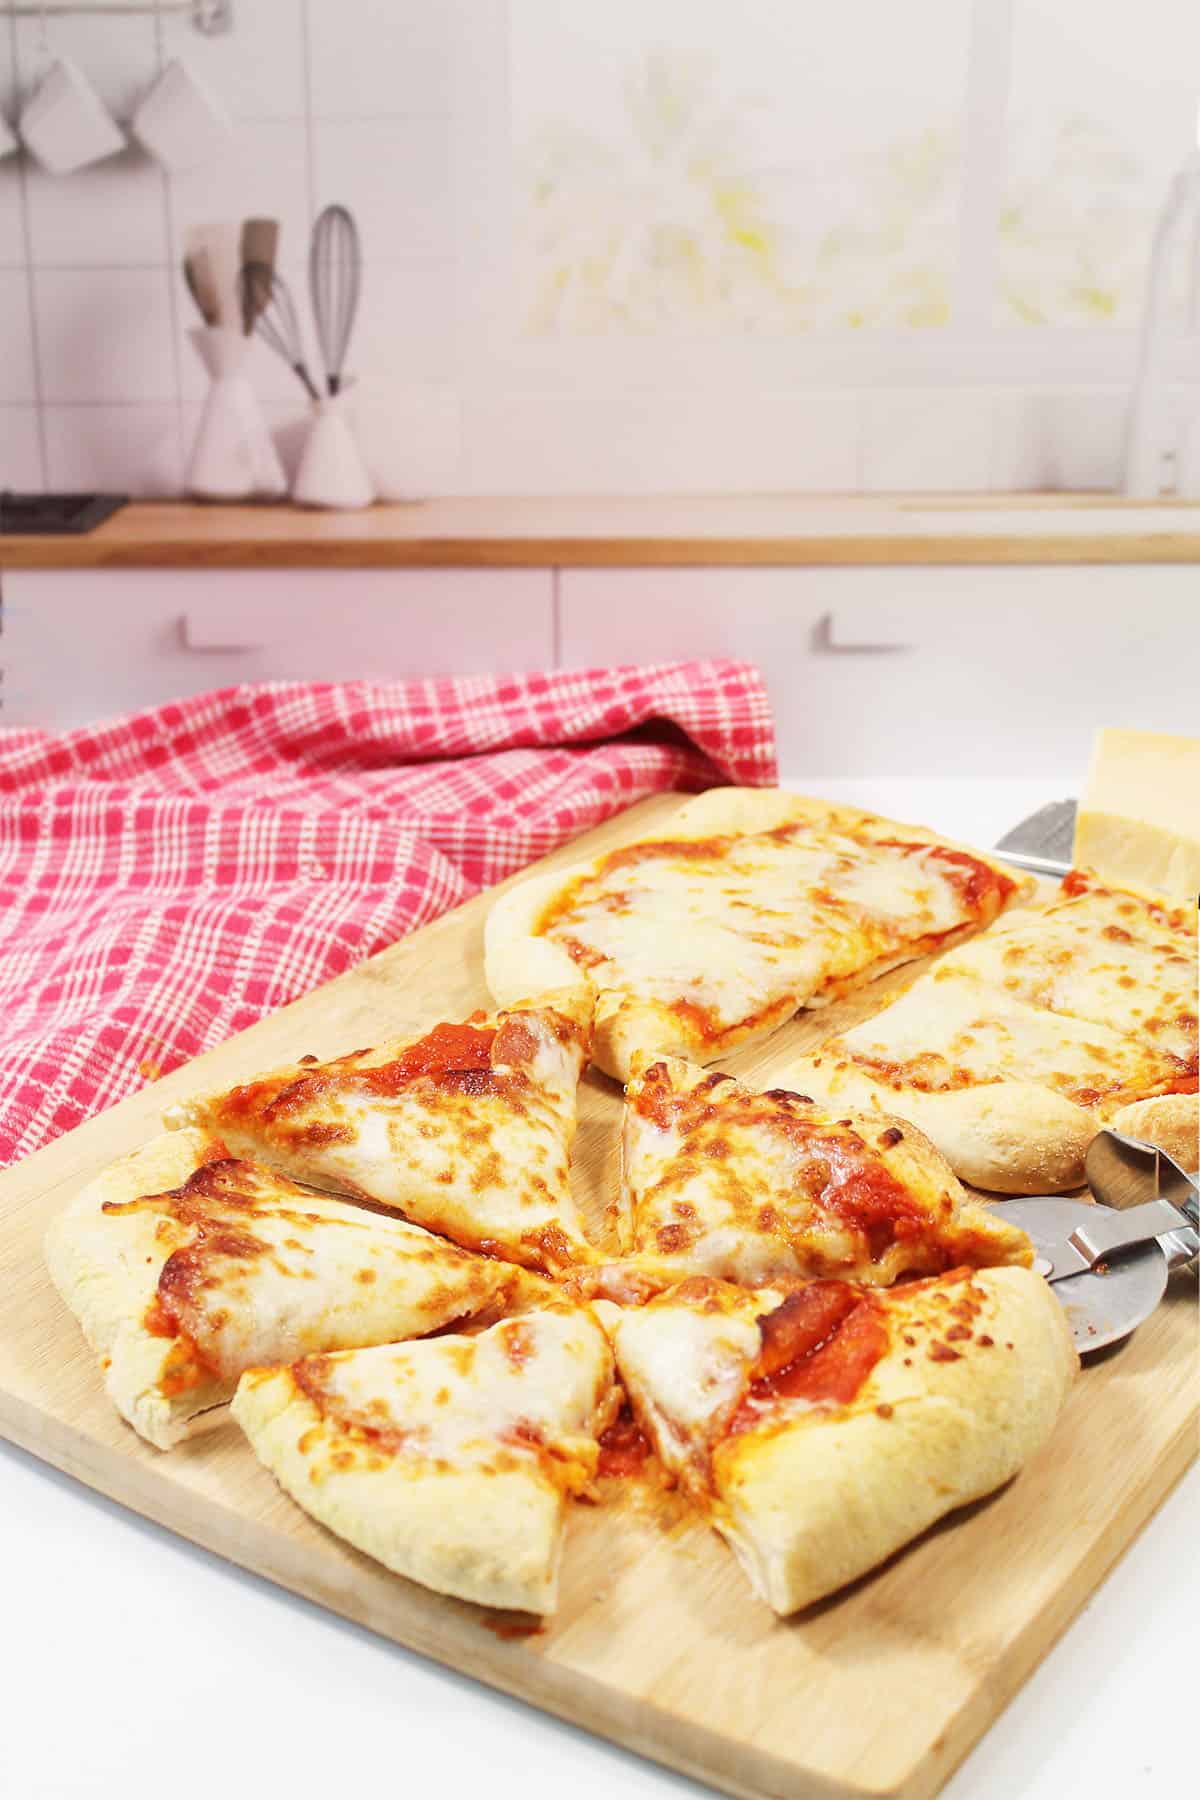 Sliced air fryer pizzas on wooden cutting board.